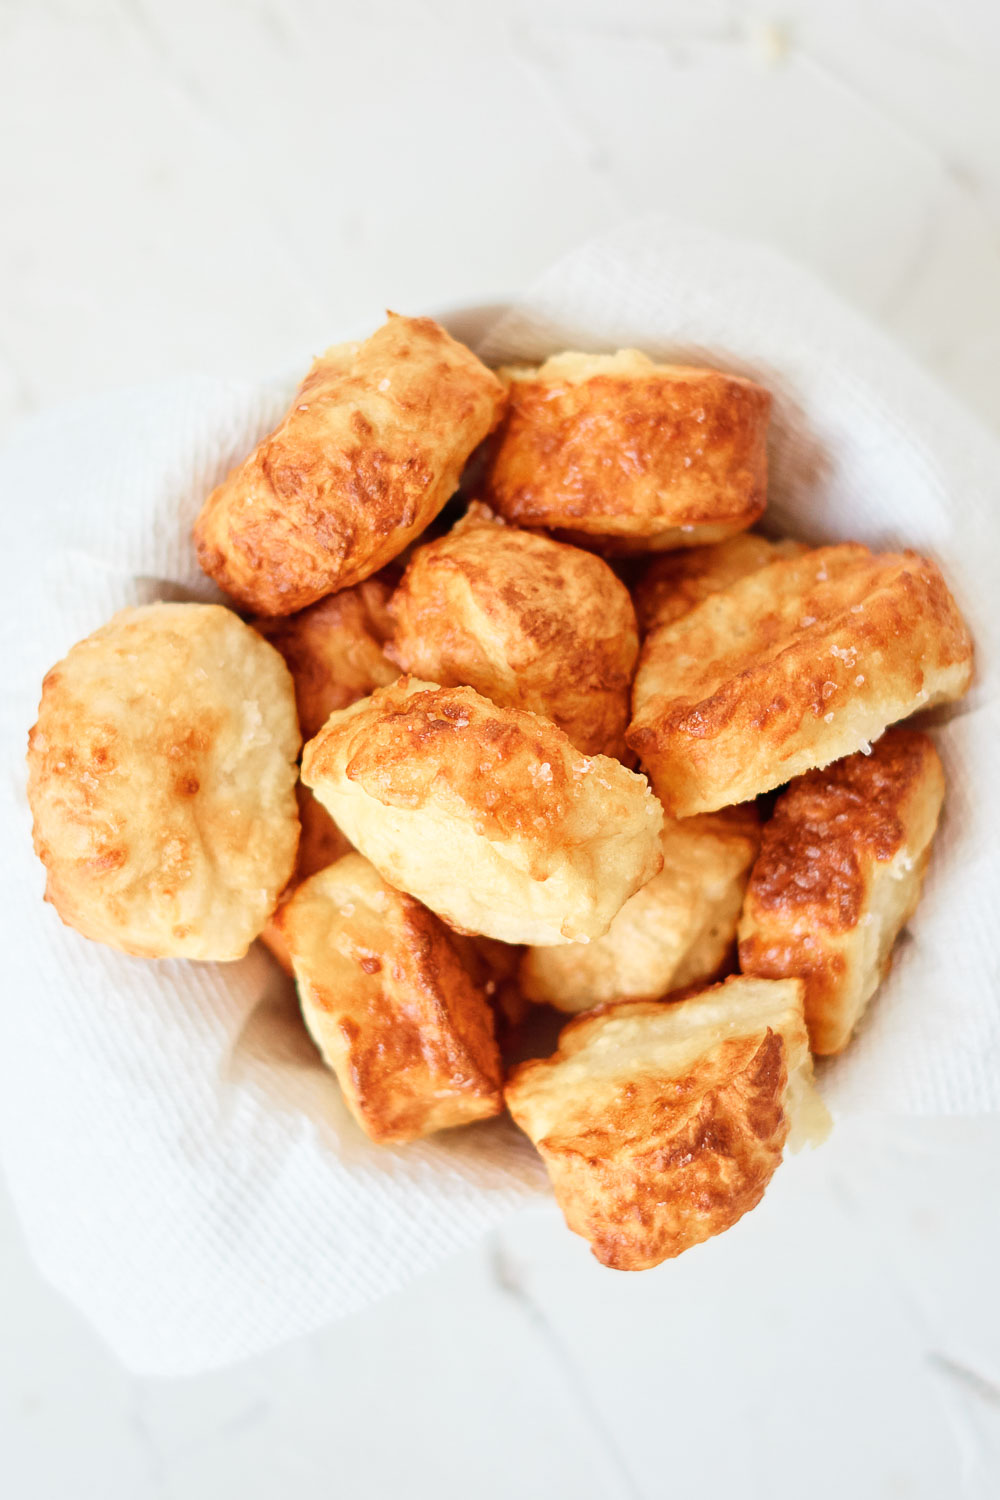 These easy air fryer pretzel bites are a quick and delicious answer to the appetizer party question you didn't even know you had. They are addictive as they are delicious and only take four ingredients to make. Plus, they are vegan-friendly!